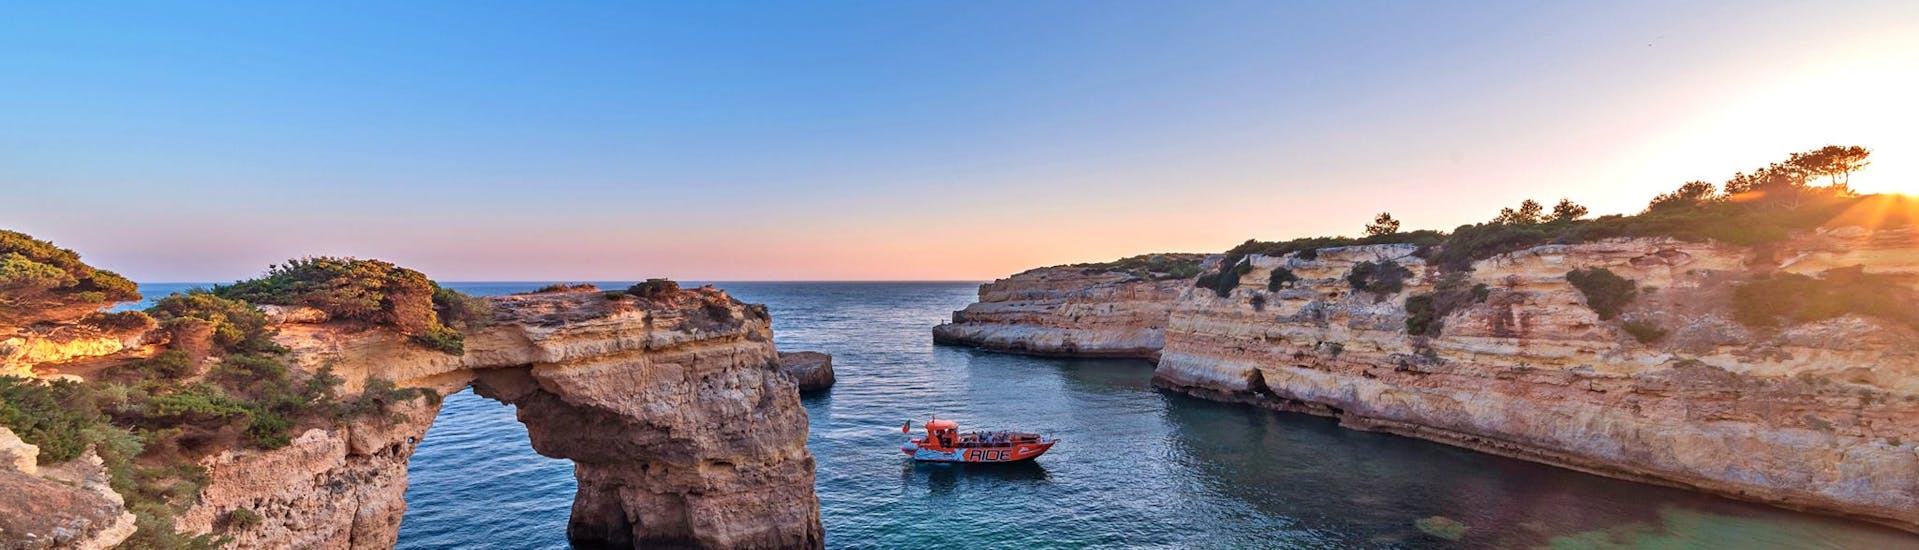 Sunset Boat Trip to the Benagil Cave from Albufeira from XRide Algarve.